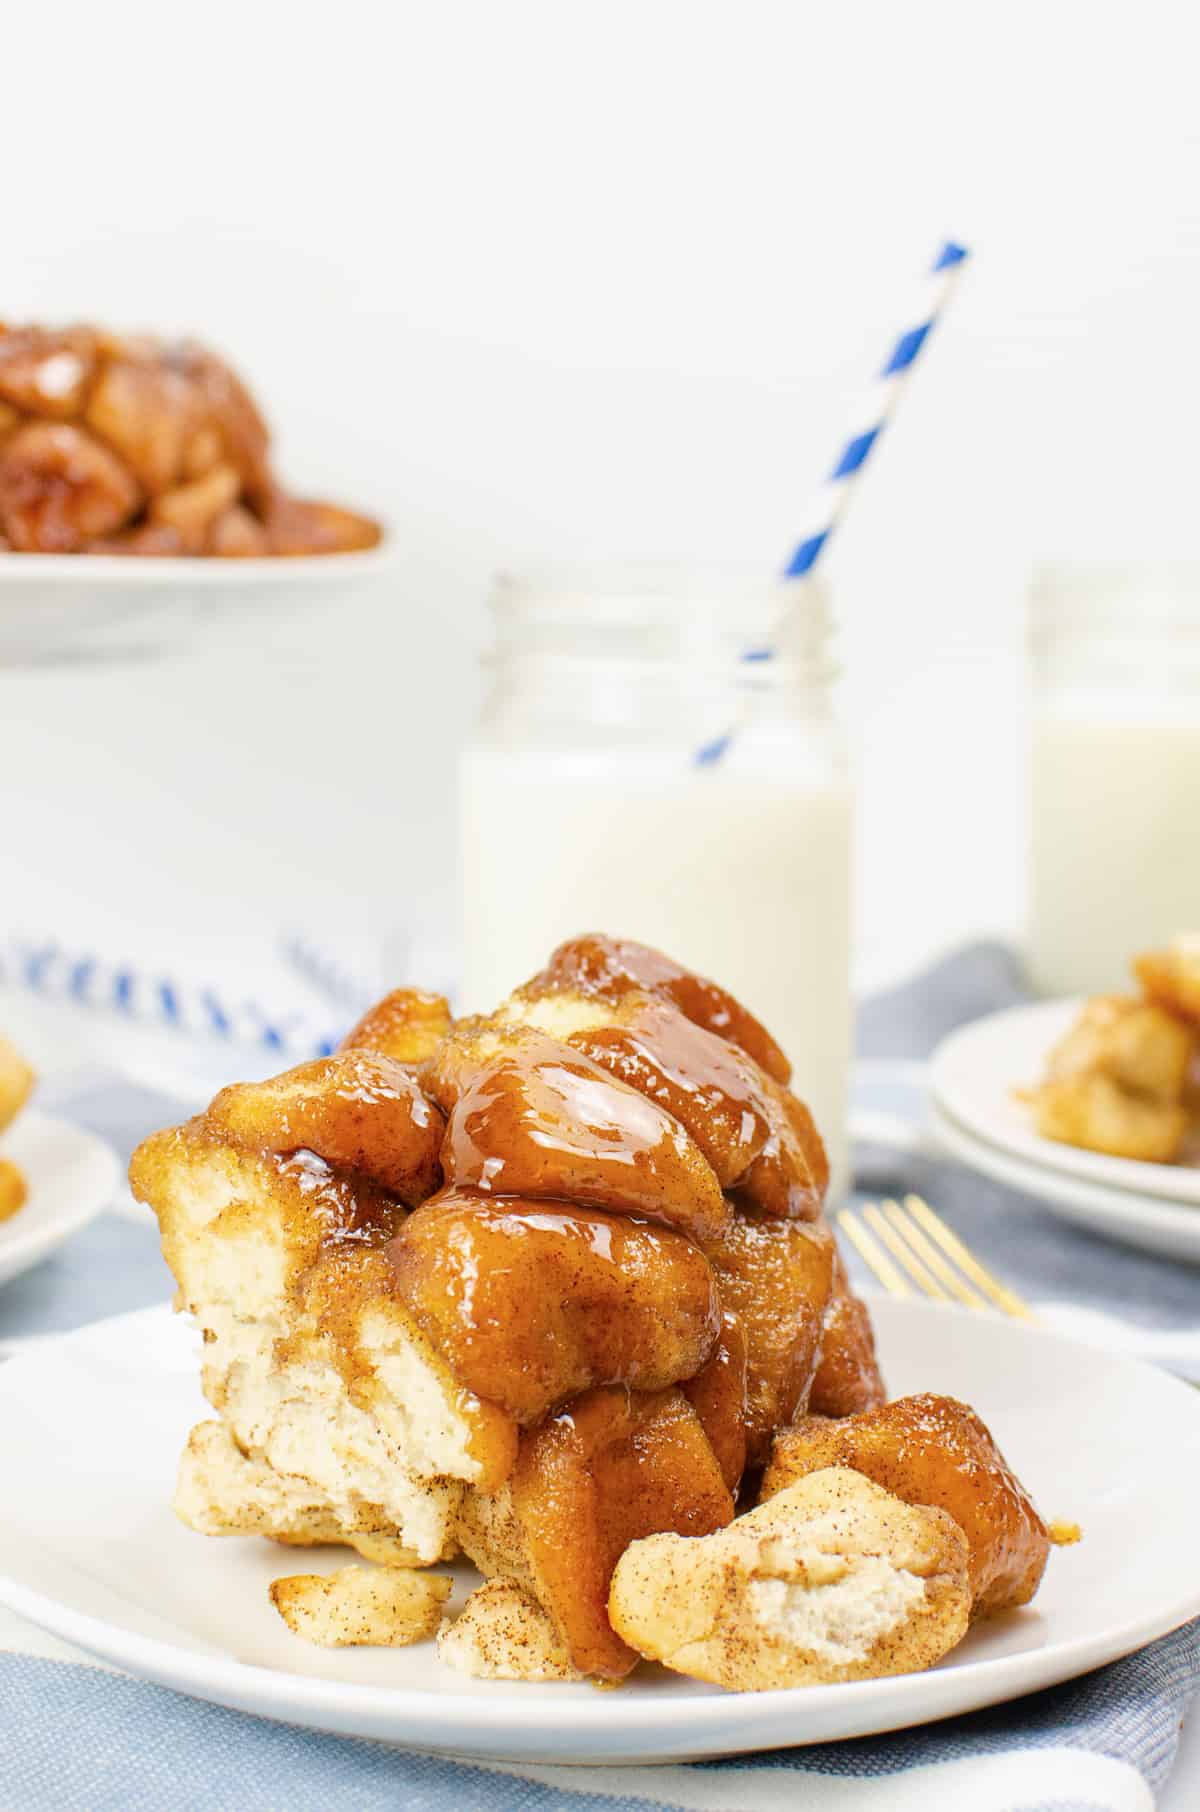 monkey bread serving on white plate with whole monkey bread and glass of milk with straw in background